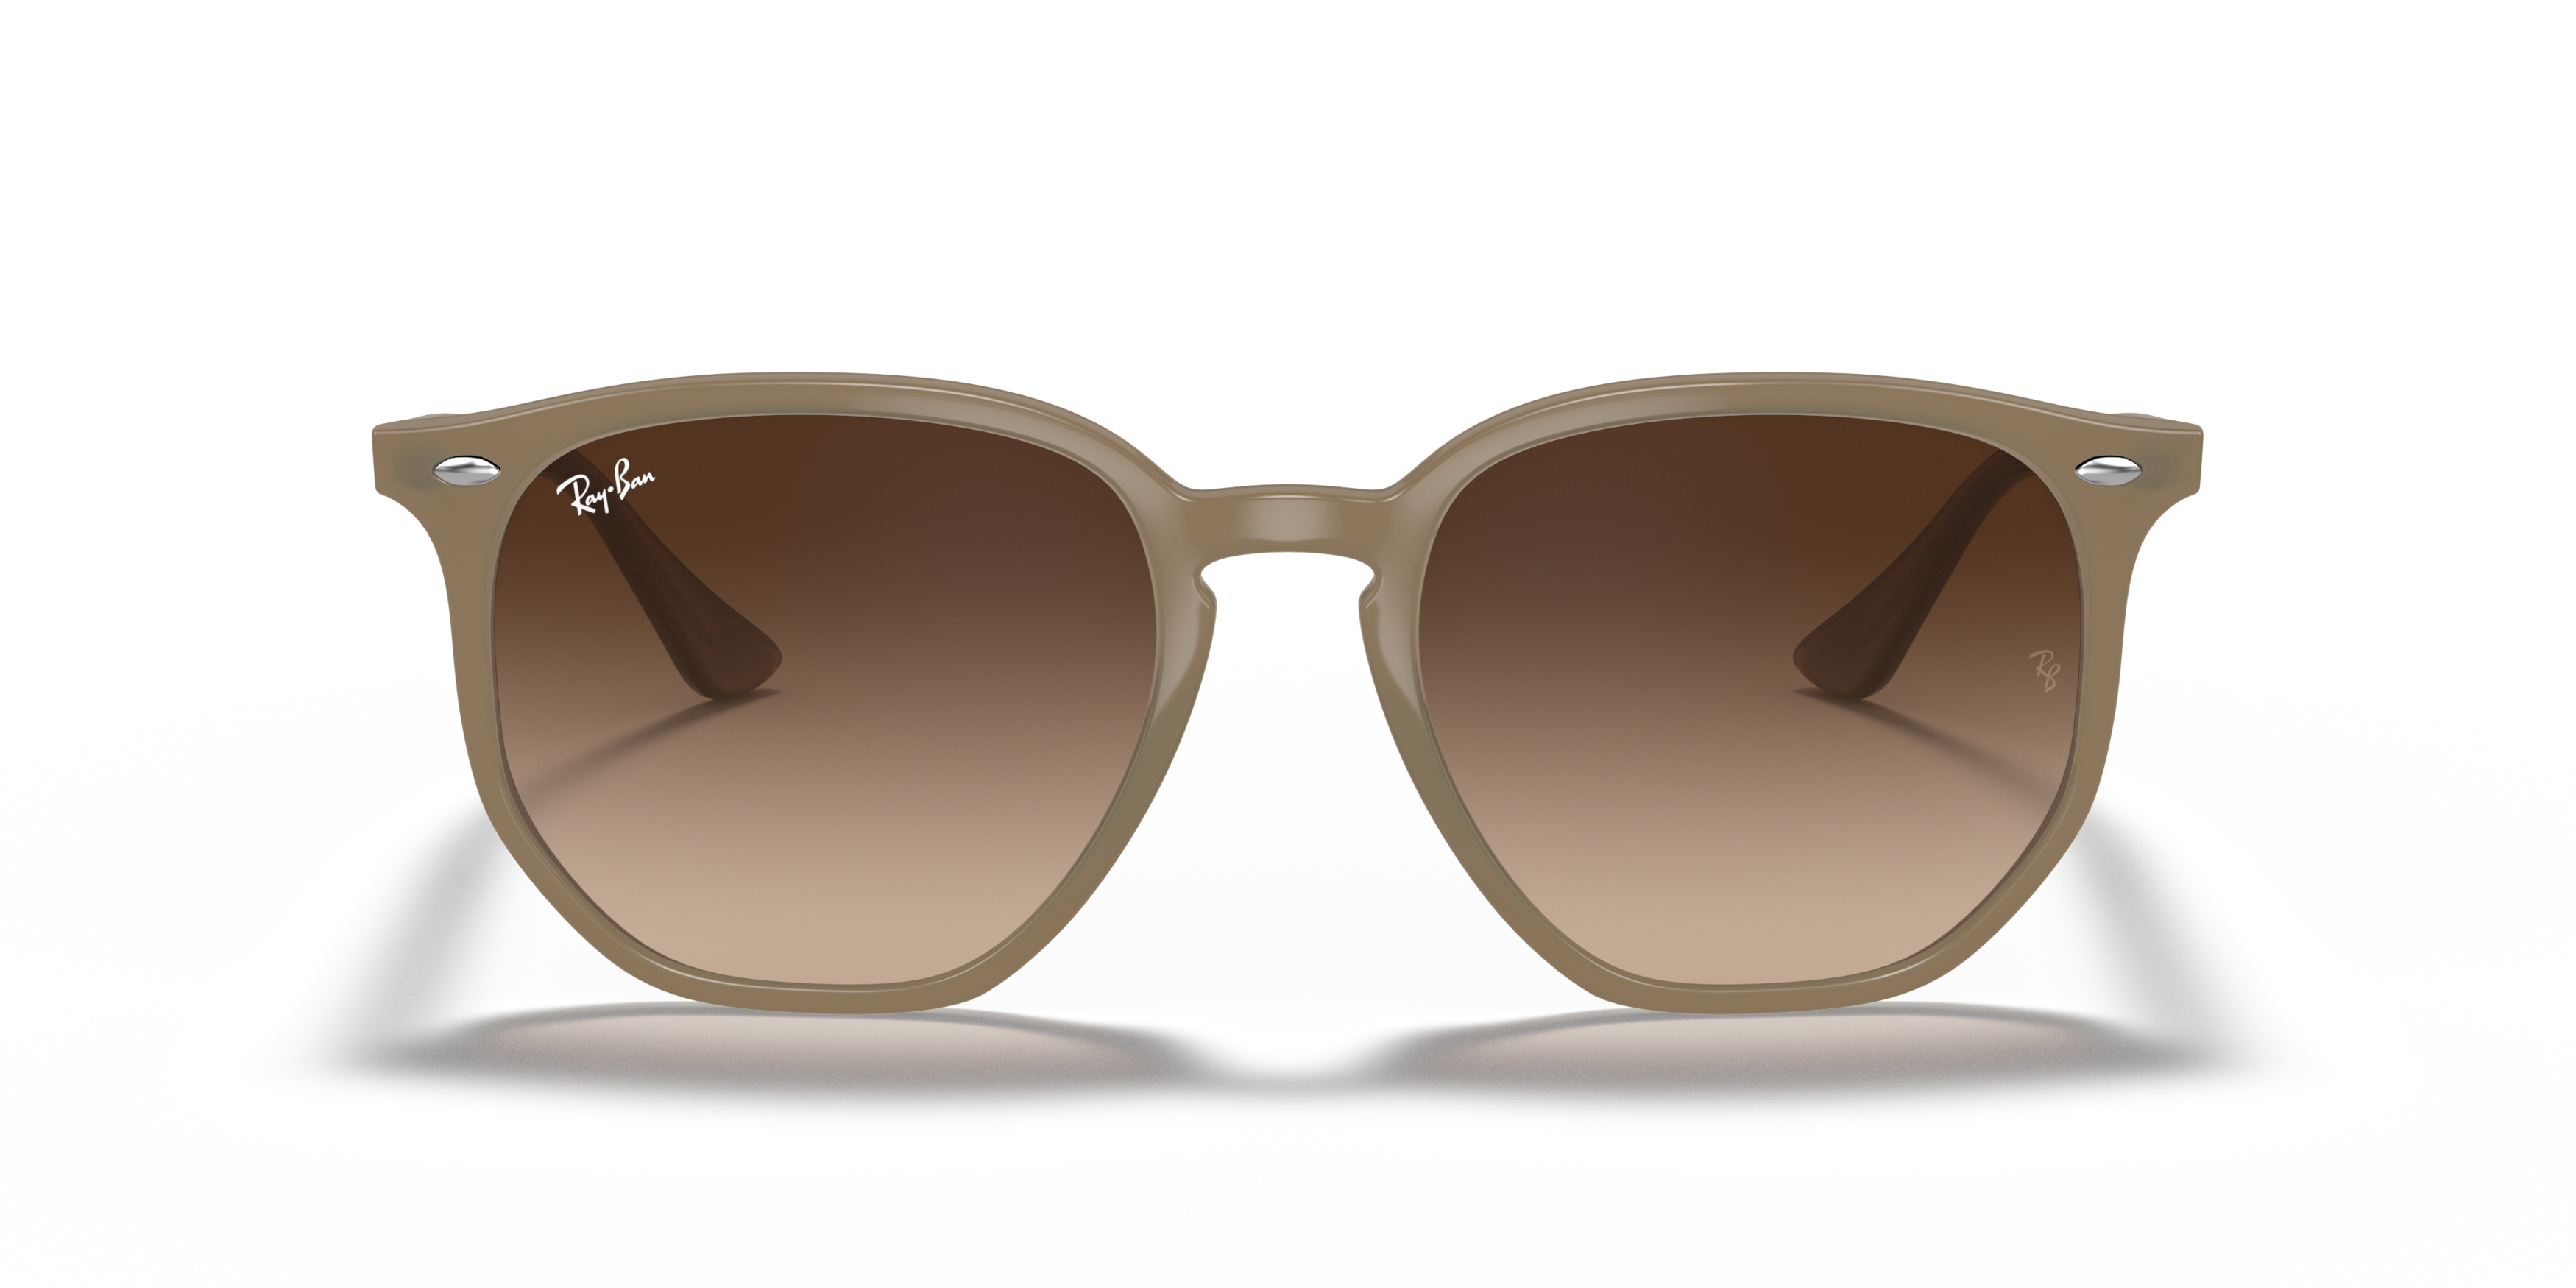 Front Ray-Ban RB 4306 Sunglasses Brown / Transparent, Tortoise Shell